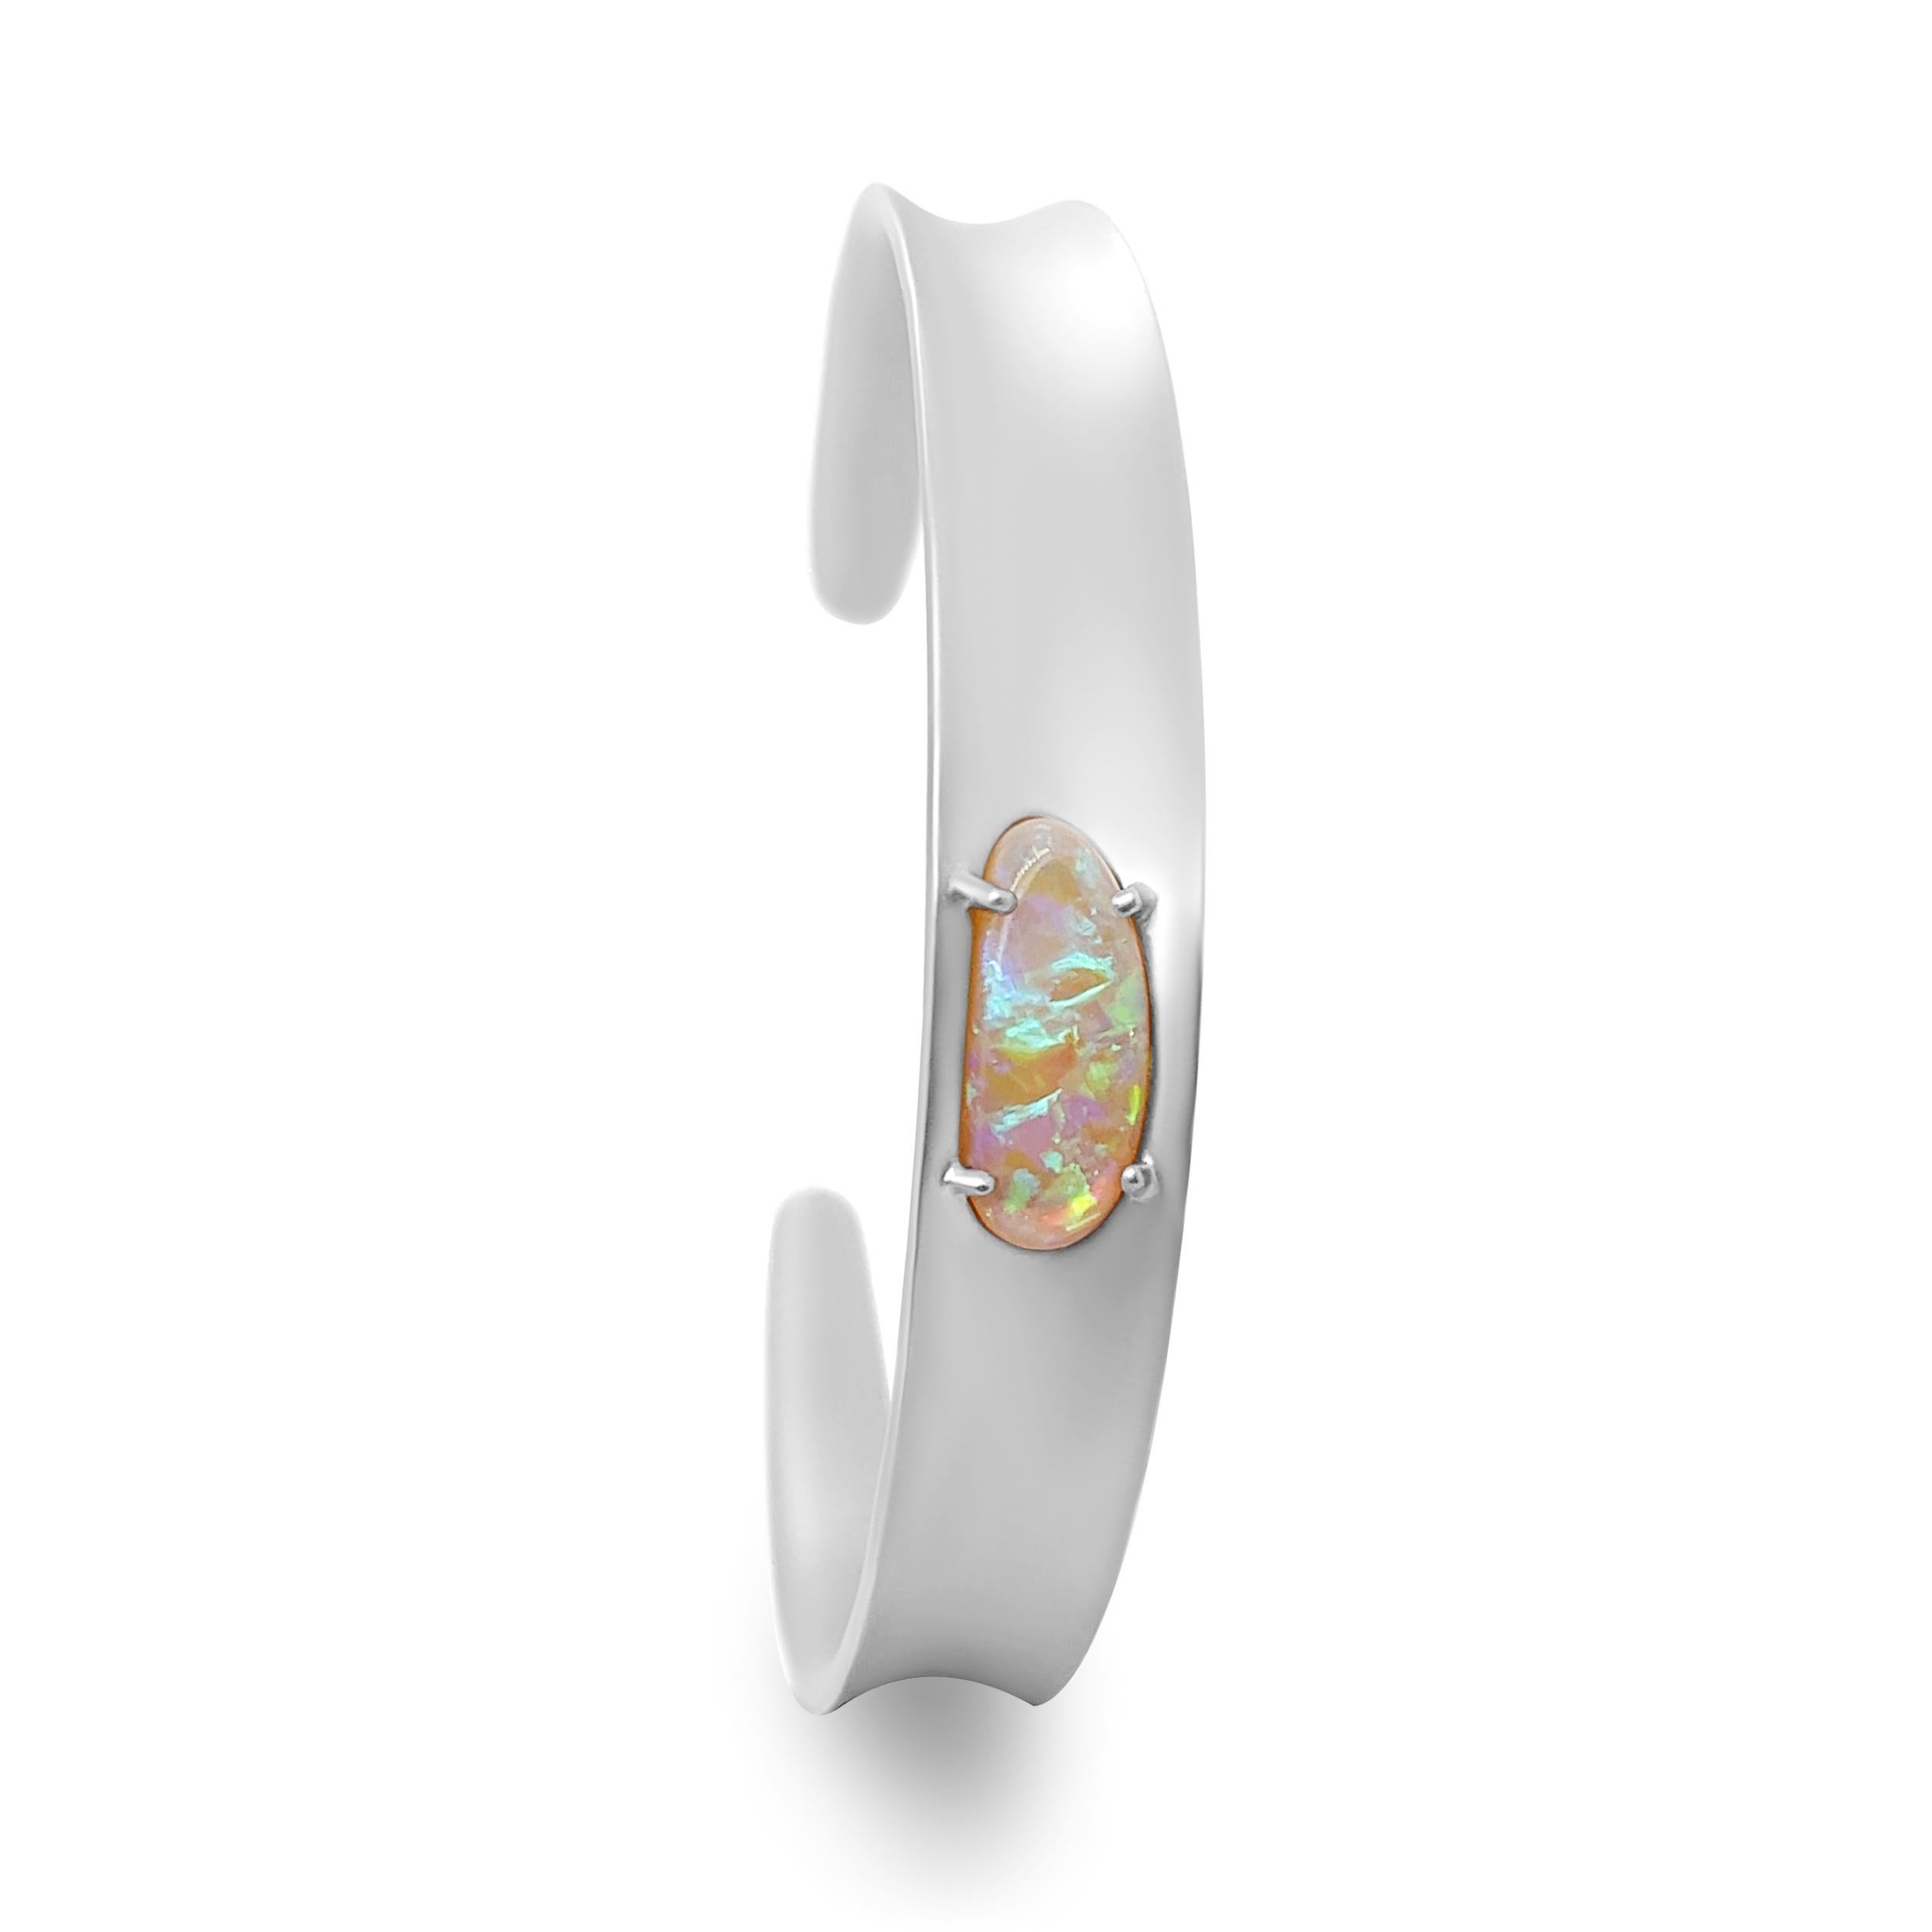 An understated yet charismatic piece is the 'Vorfruede' bracelet cuff featuring an entrancing Australian boulder opal at its center. The opal gemstone itself is electrifying with its rainbow play-of-colour emphasized by the elegant setting and